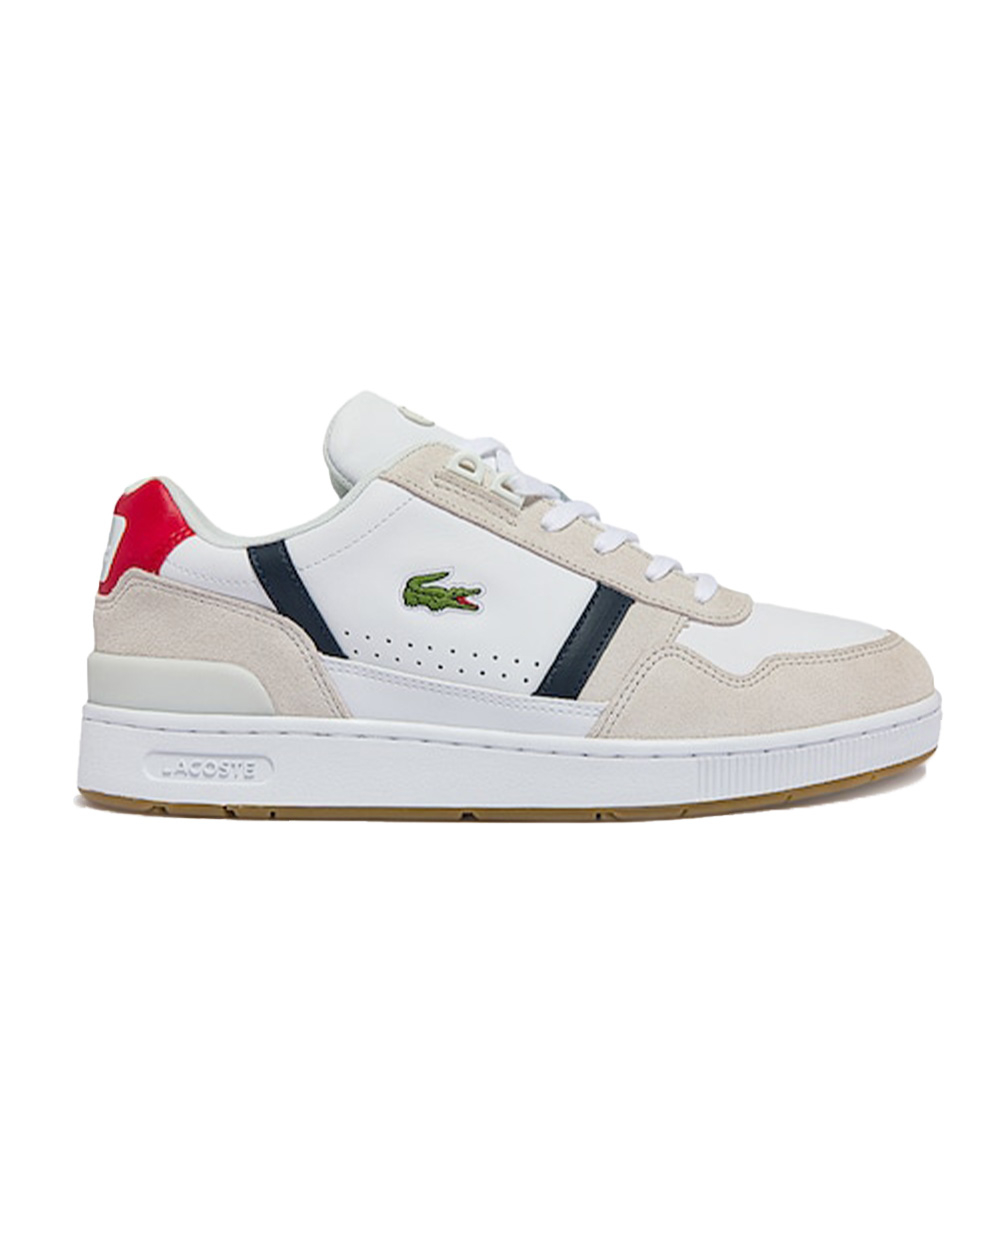 Lacoste T-Clip 0120 2 SMA (white/navy/red) | 2tall.com